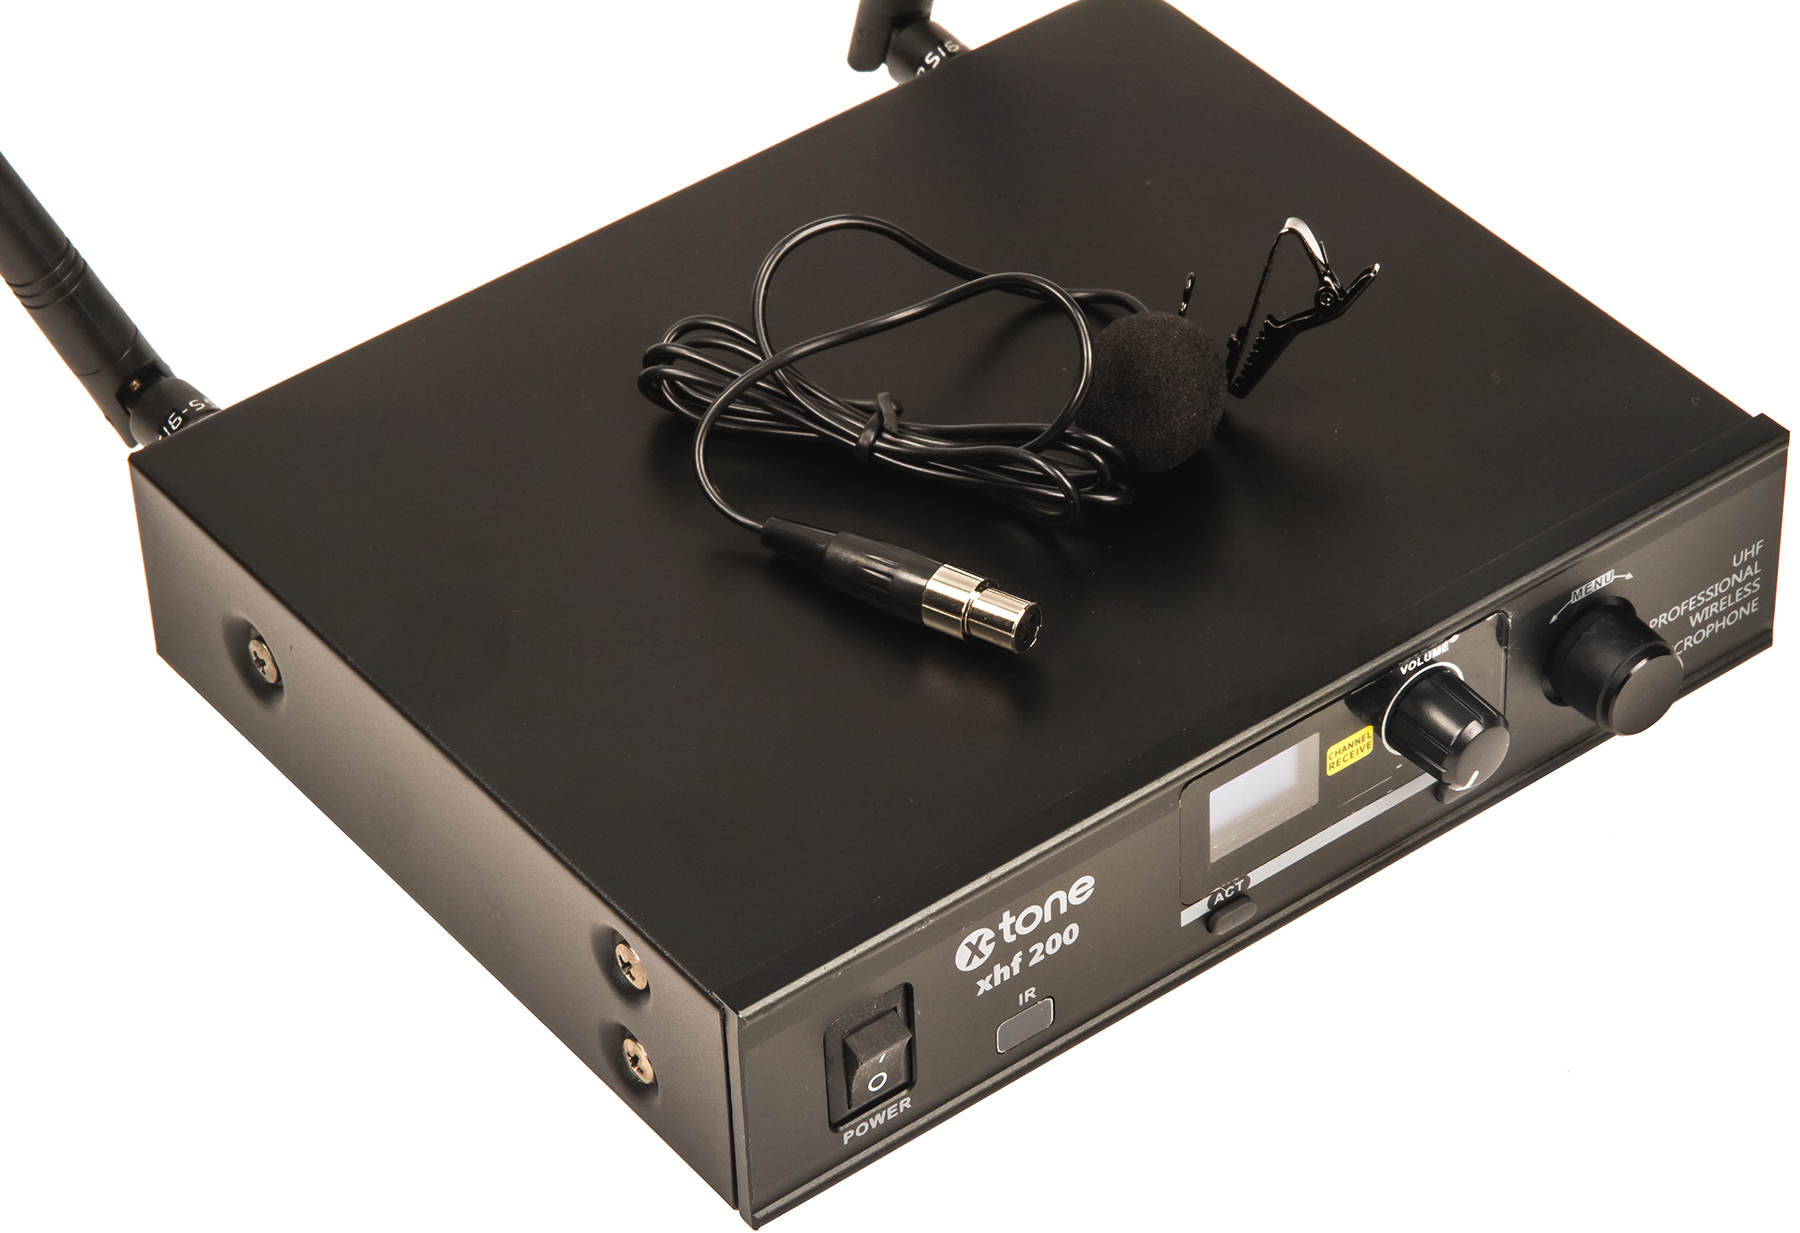 X-tone Xhf200l Systeme Hf Micro Cravate Multi Frequences - Wireless Lavalier microphone - Variation 1